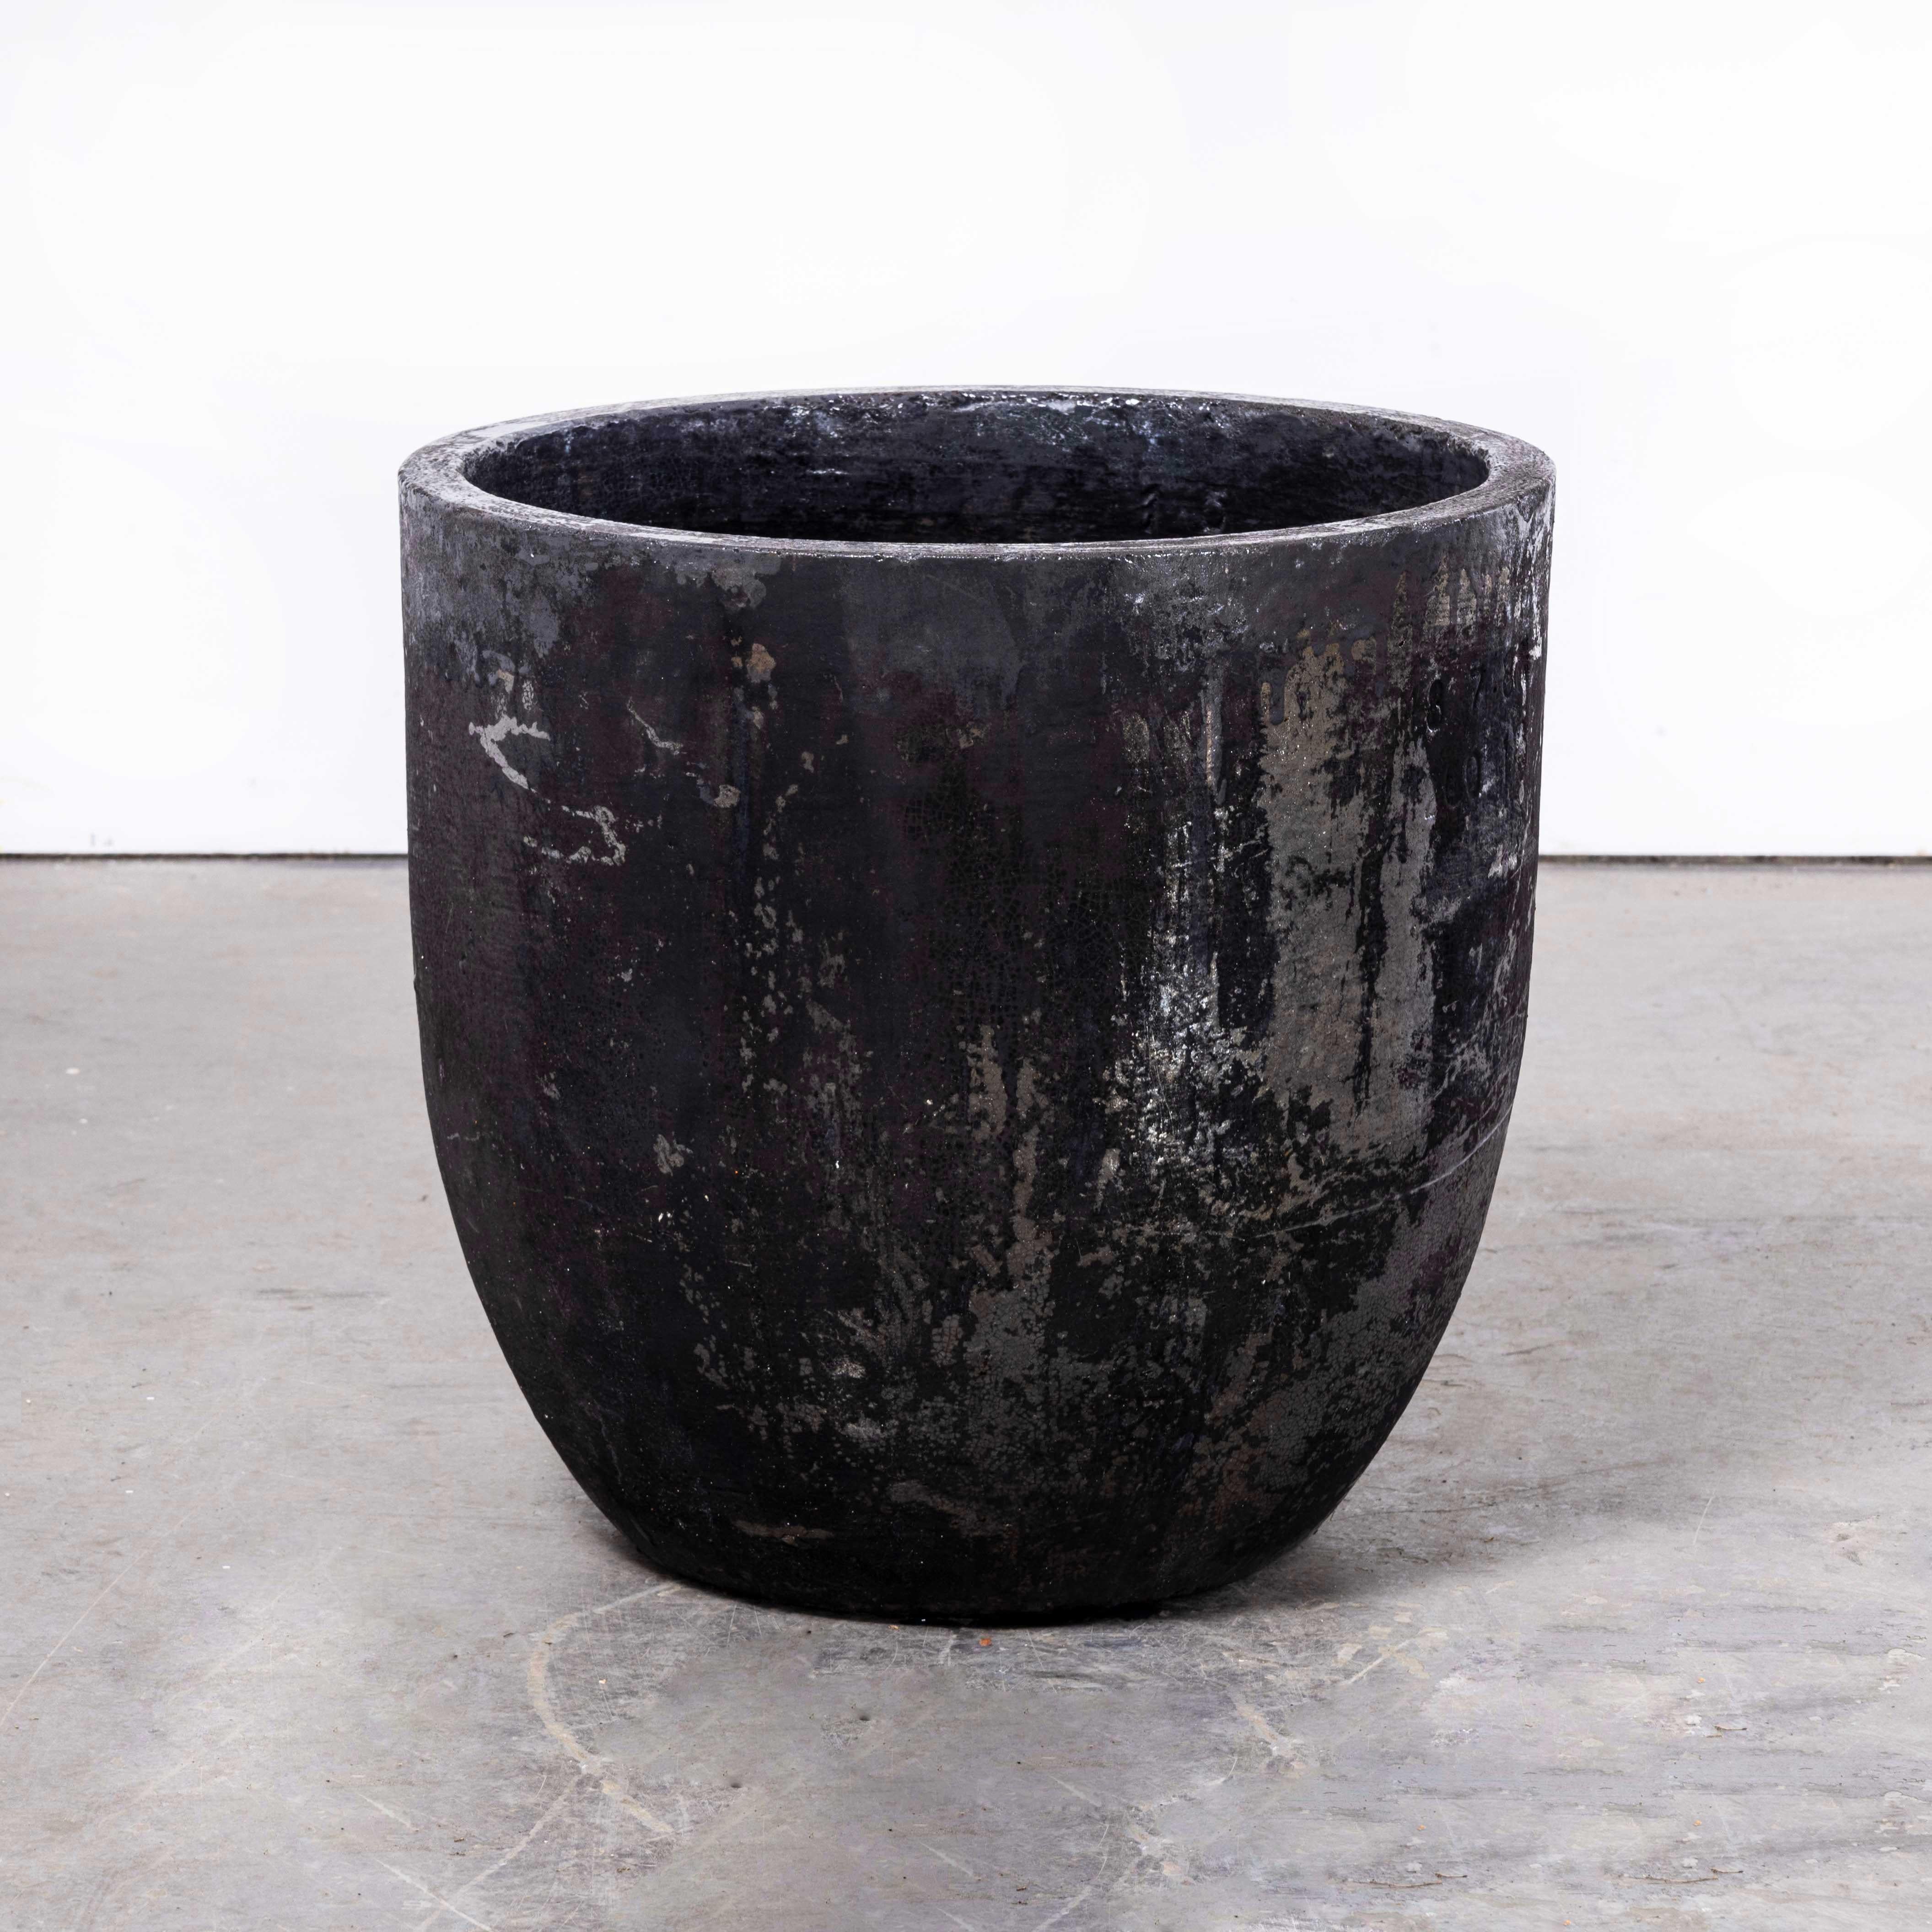 1970’s New Old Stock Foundry Crucible Pot (1525.3)
1970’s New Old Stock Foundry Crucible Pot. Sourced in Belgium this crucible pot is new old stock from the 1970’s, never used. Crucible pots are high heat resistant pots used to hold and pour molten